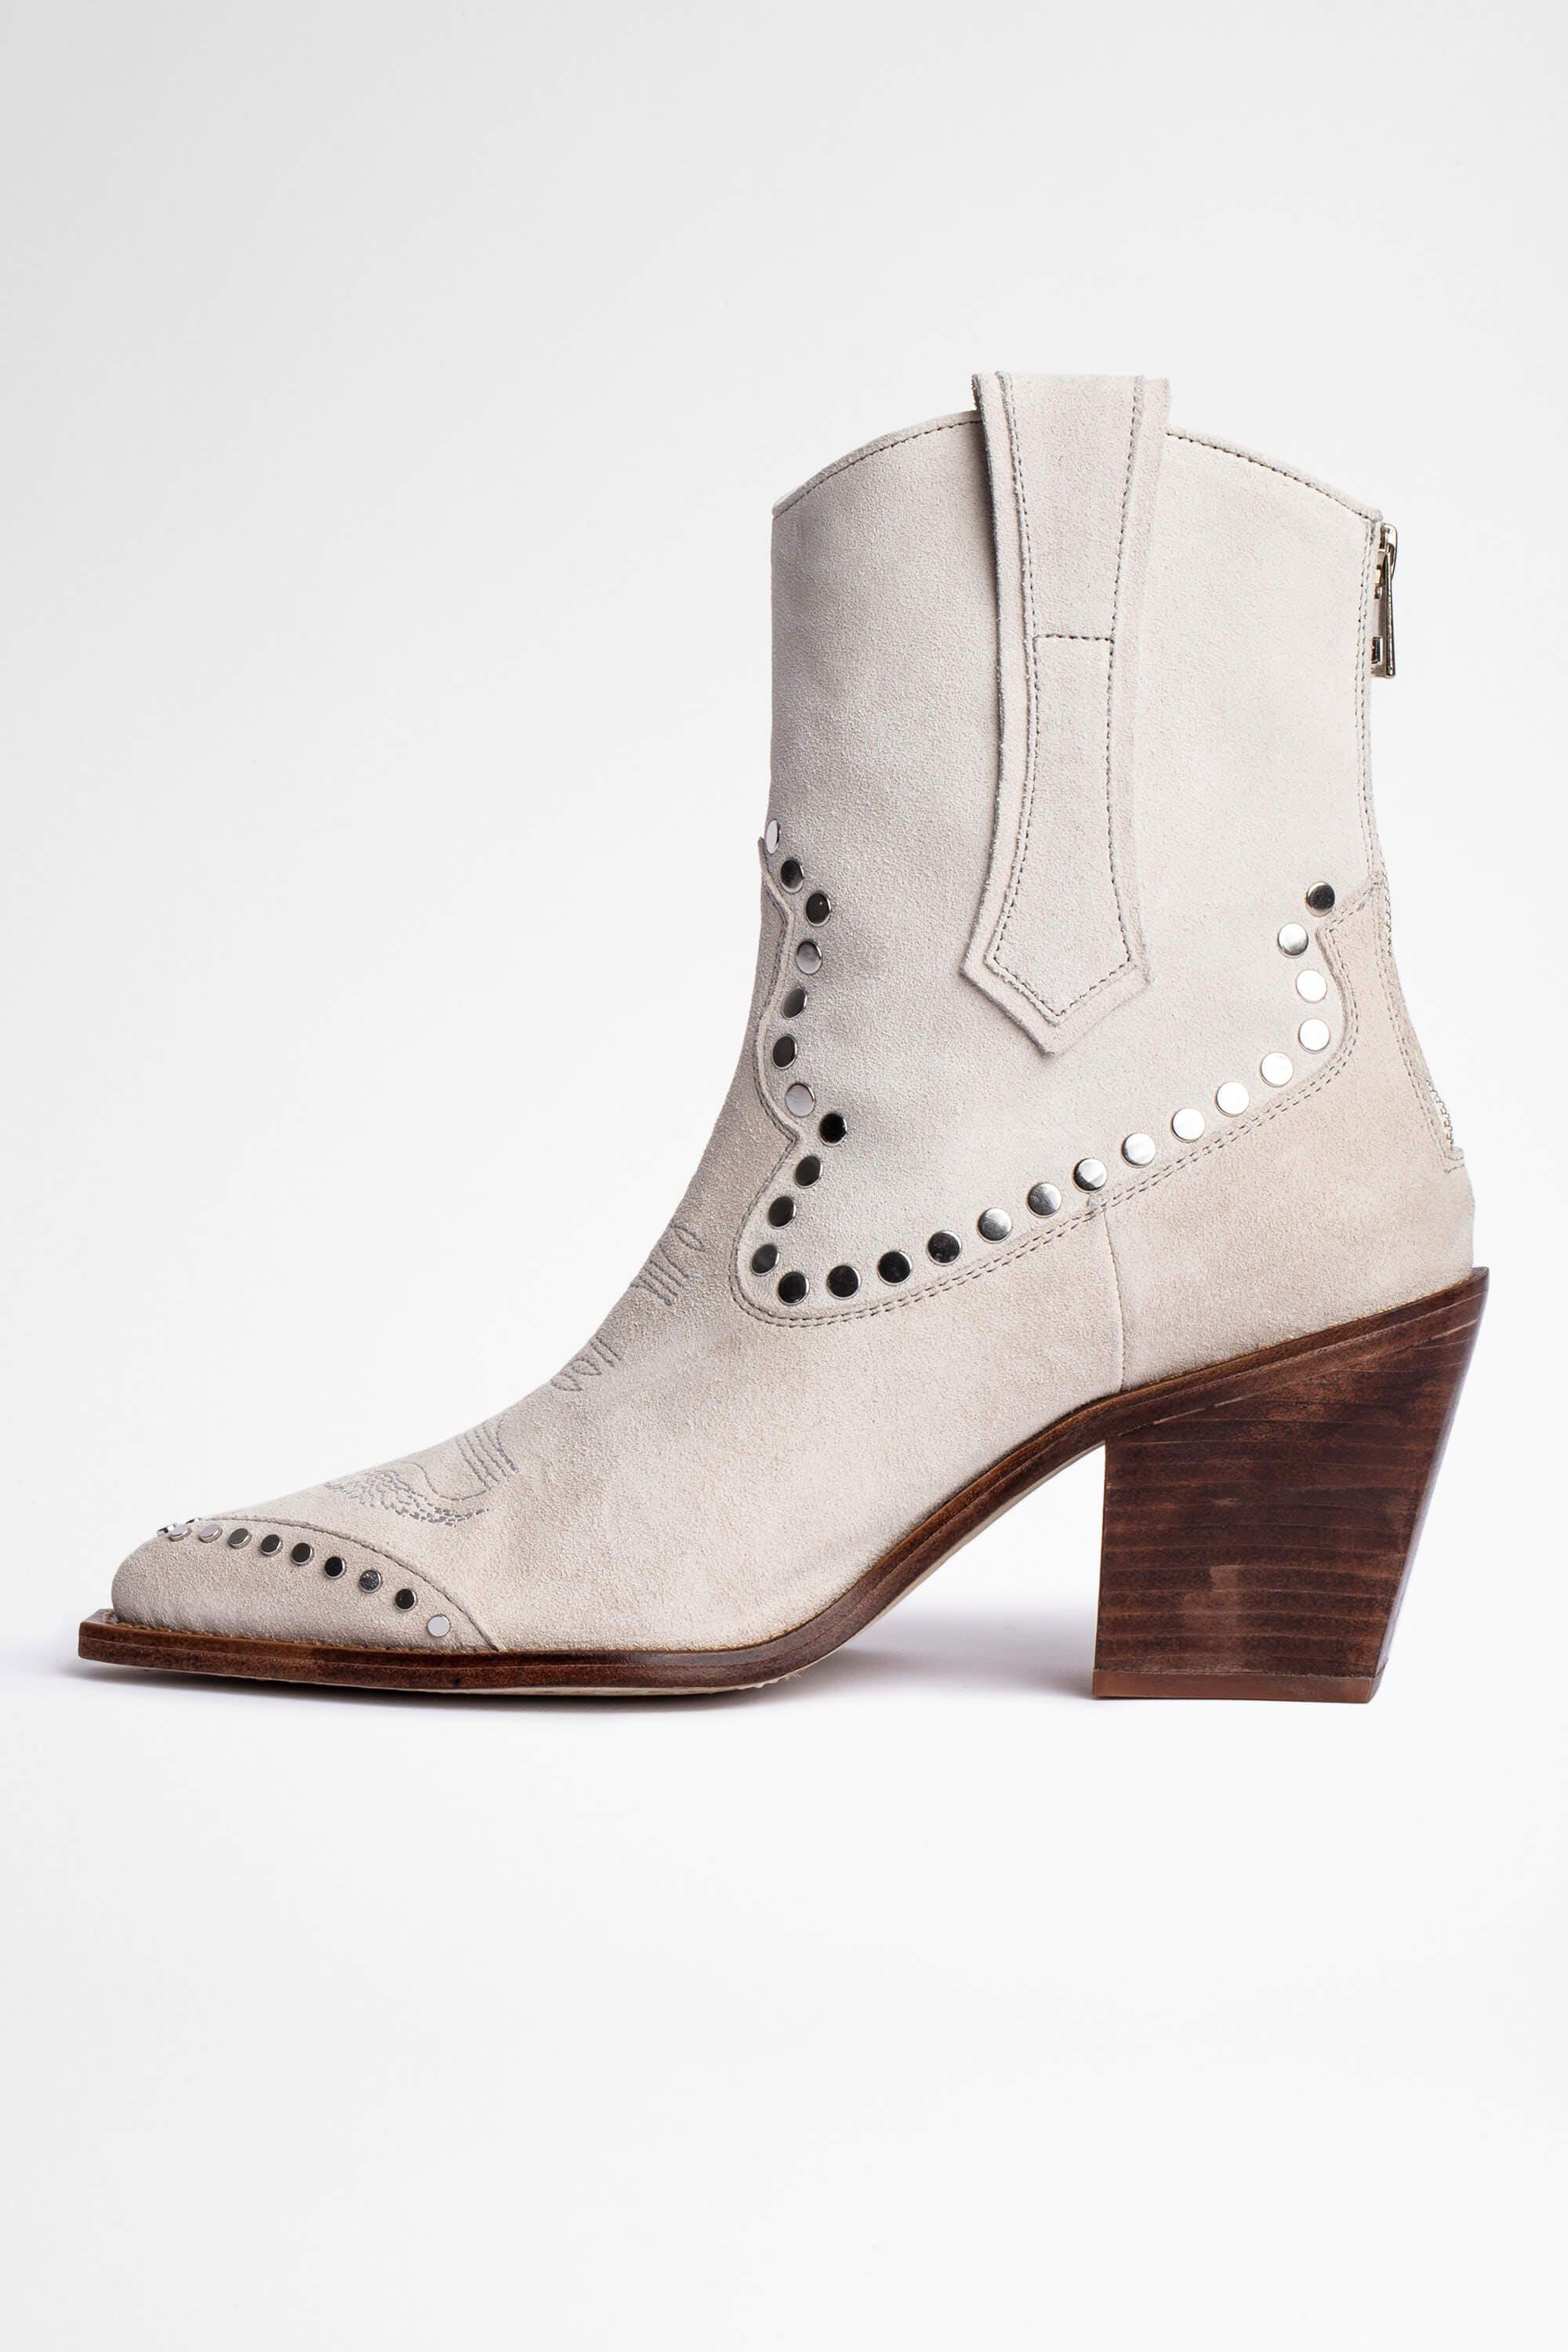 Zadig & Voltaire Cara High Boots in White | Lyst